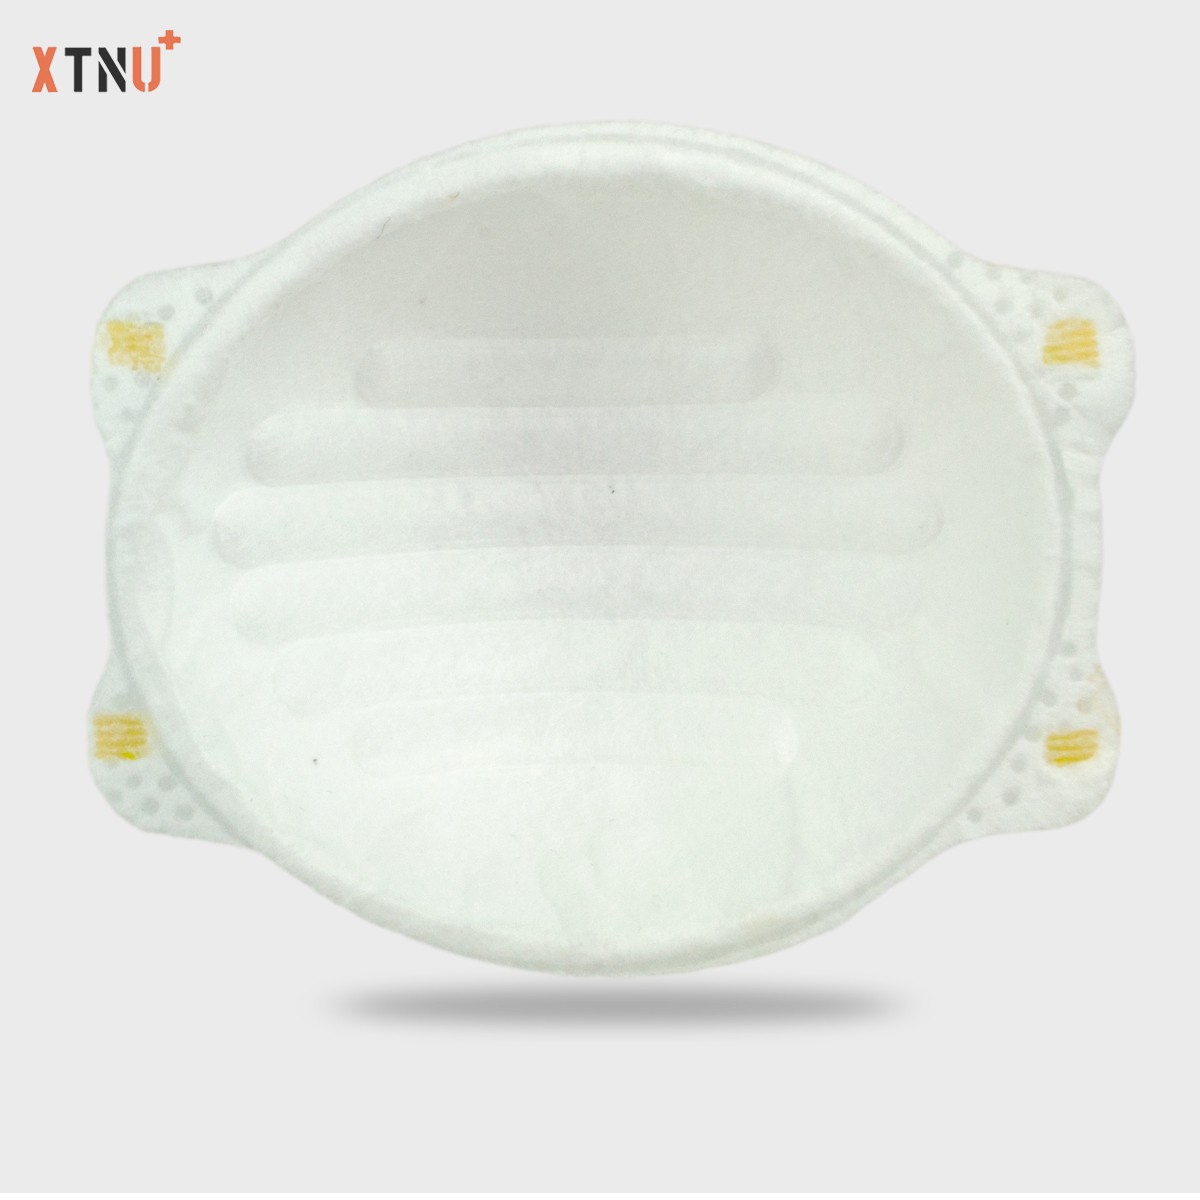 Cup shaped mask without respiratory valve